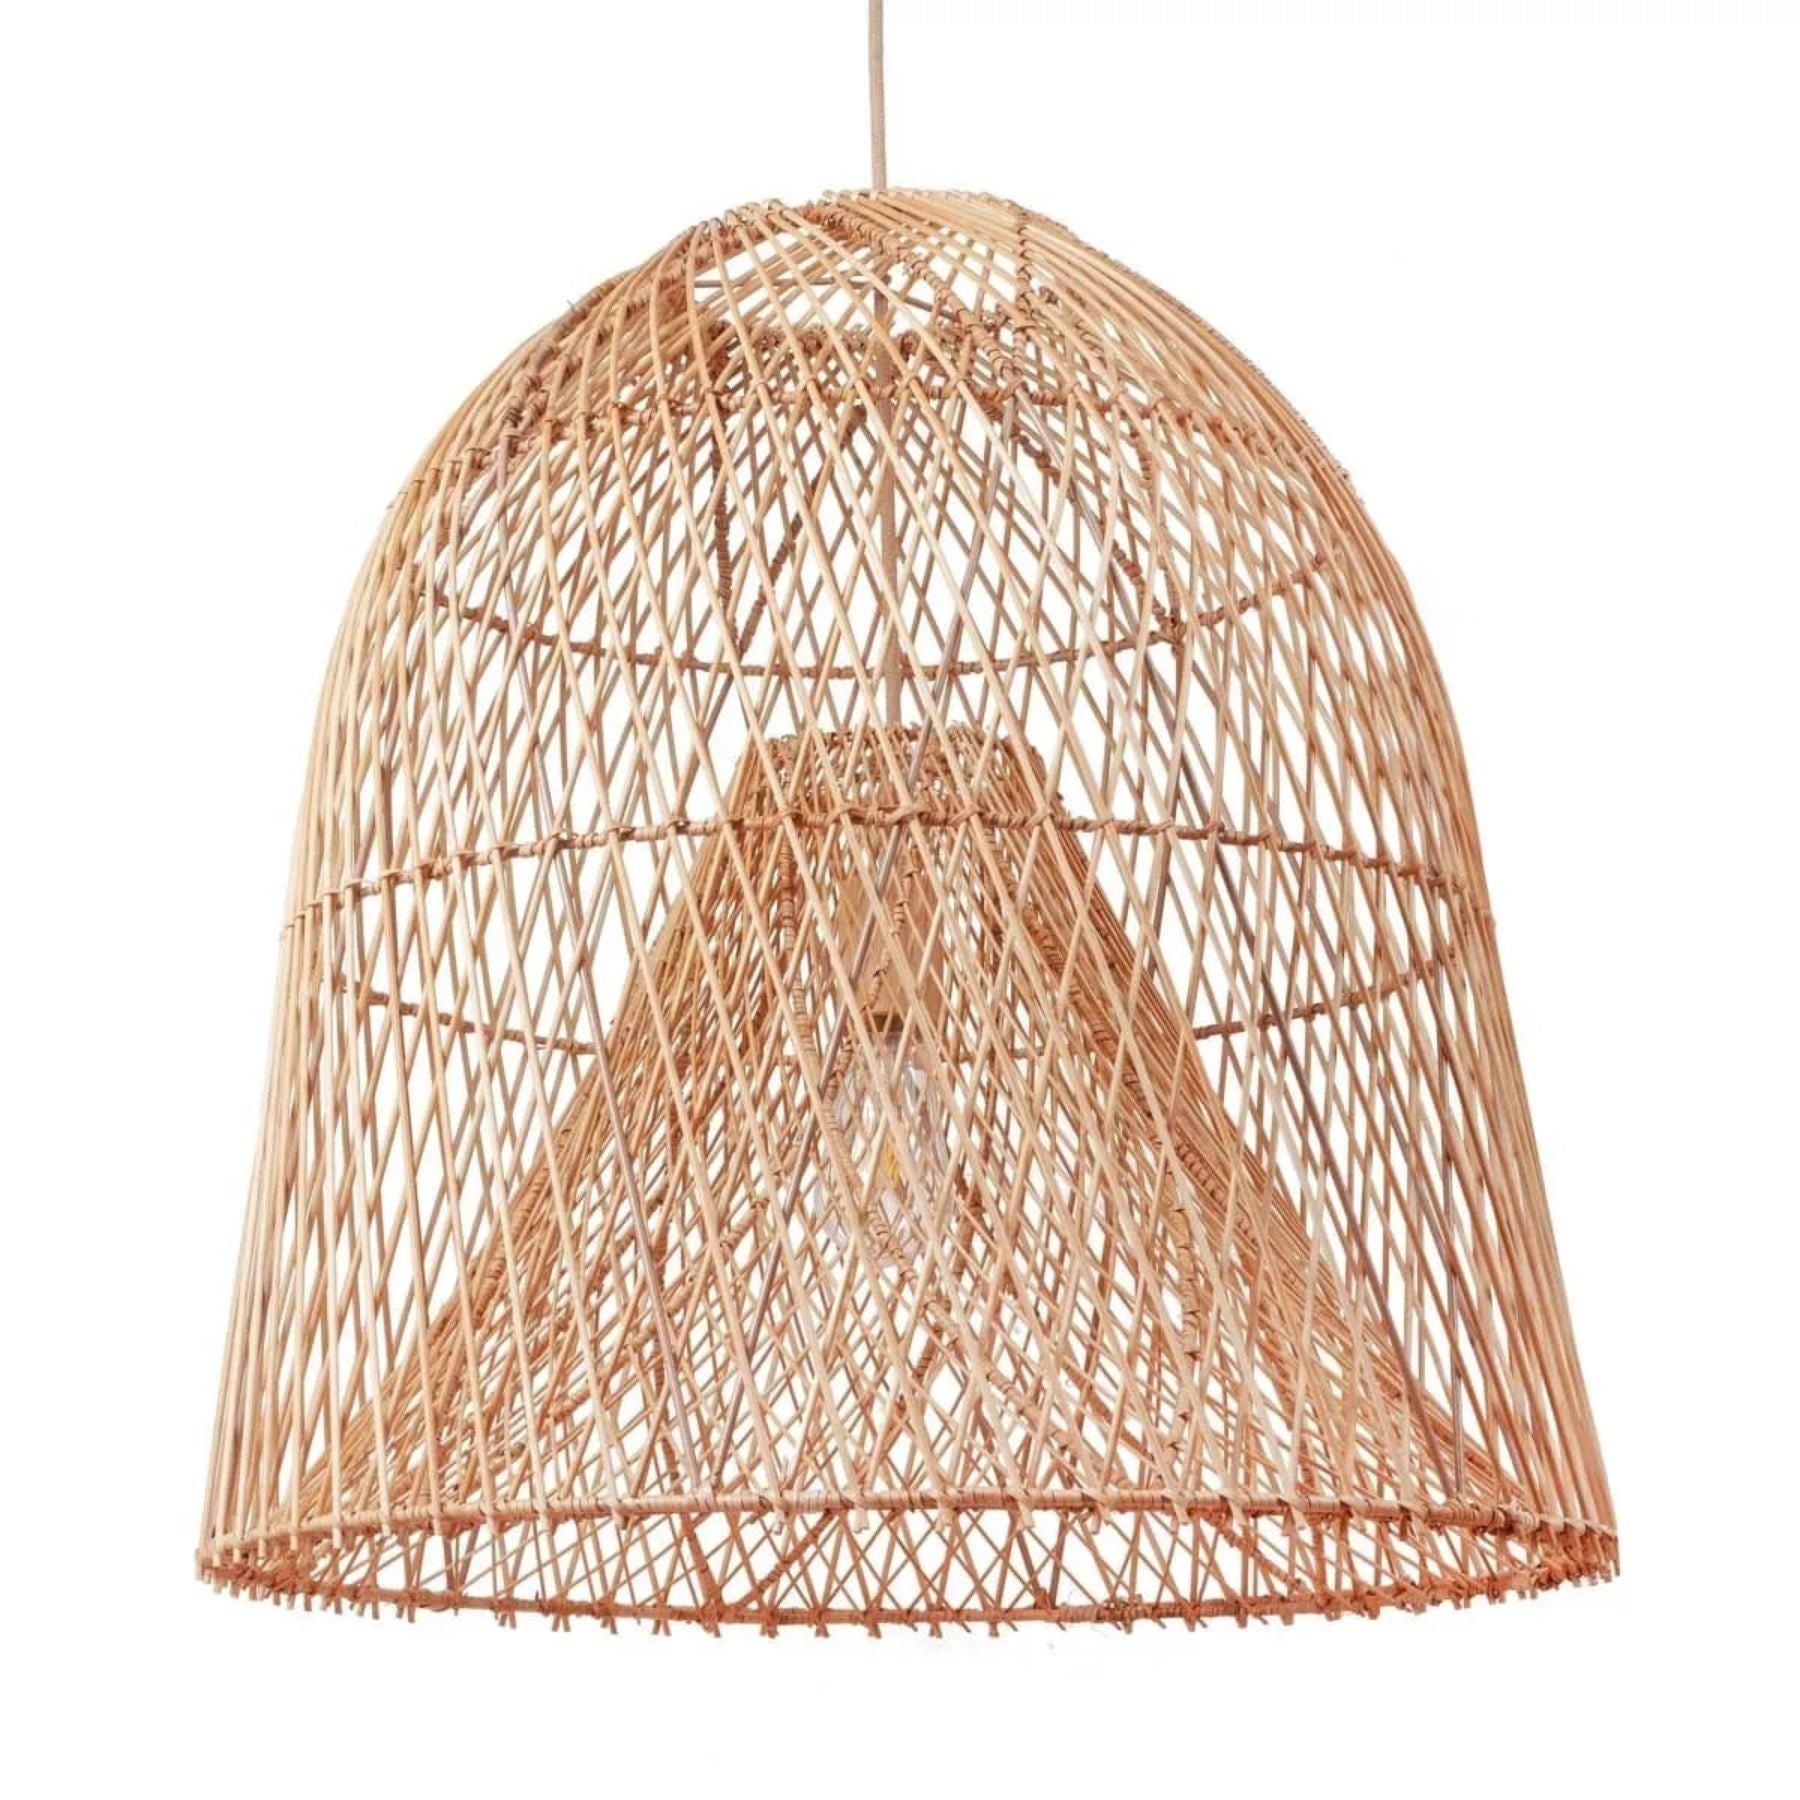 the santa barbara pendant lamp is shaped like a classic fishing basket using a double frame technique